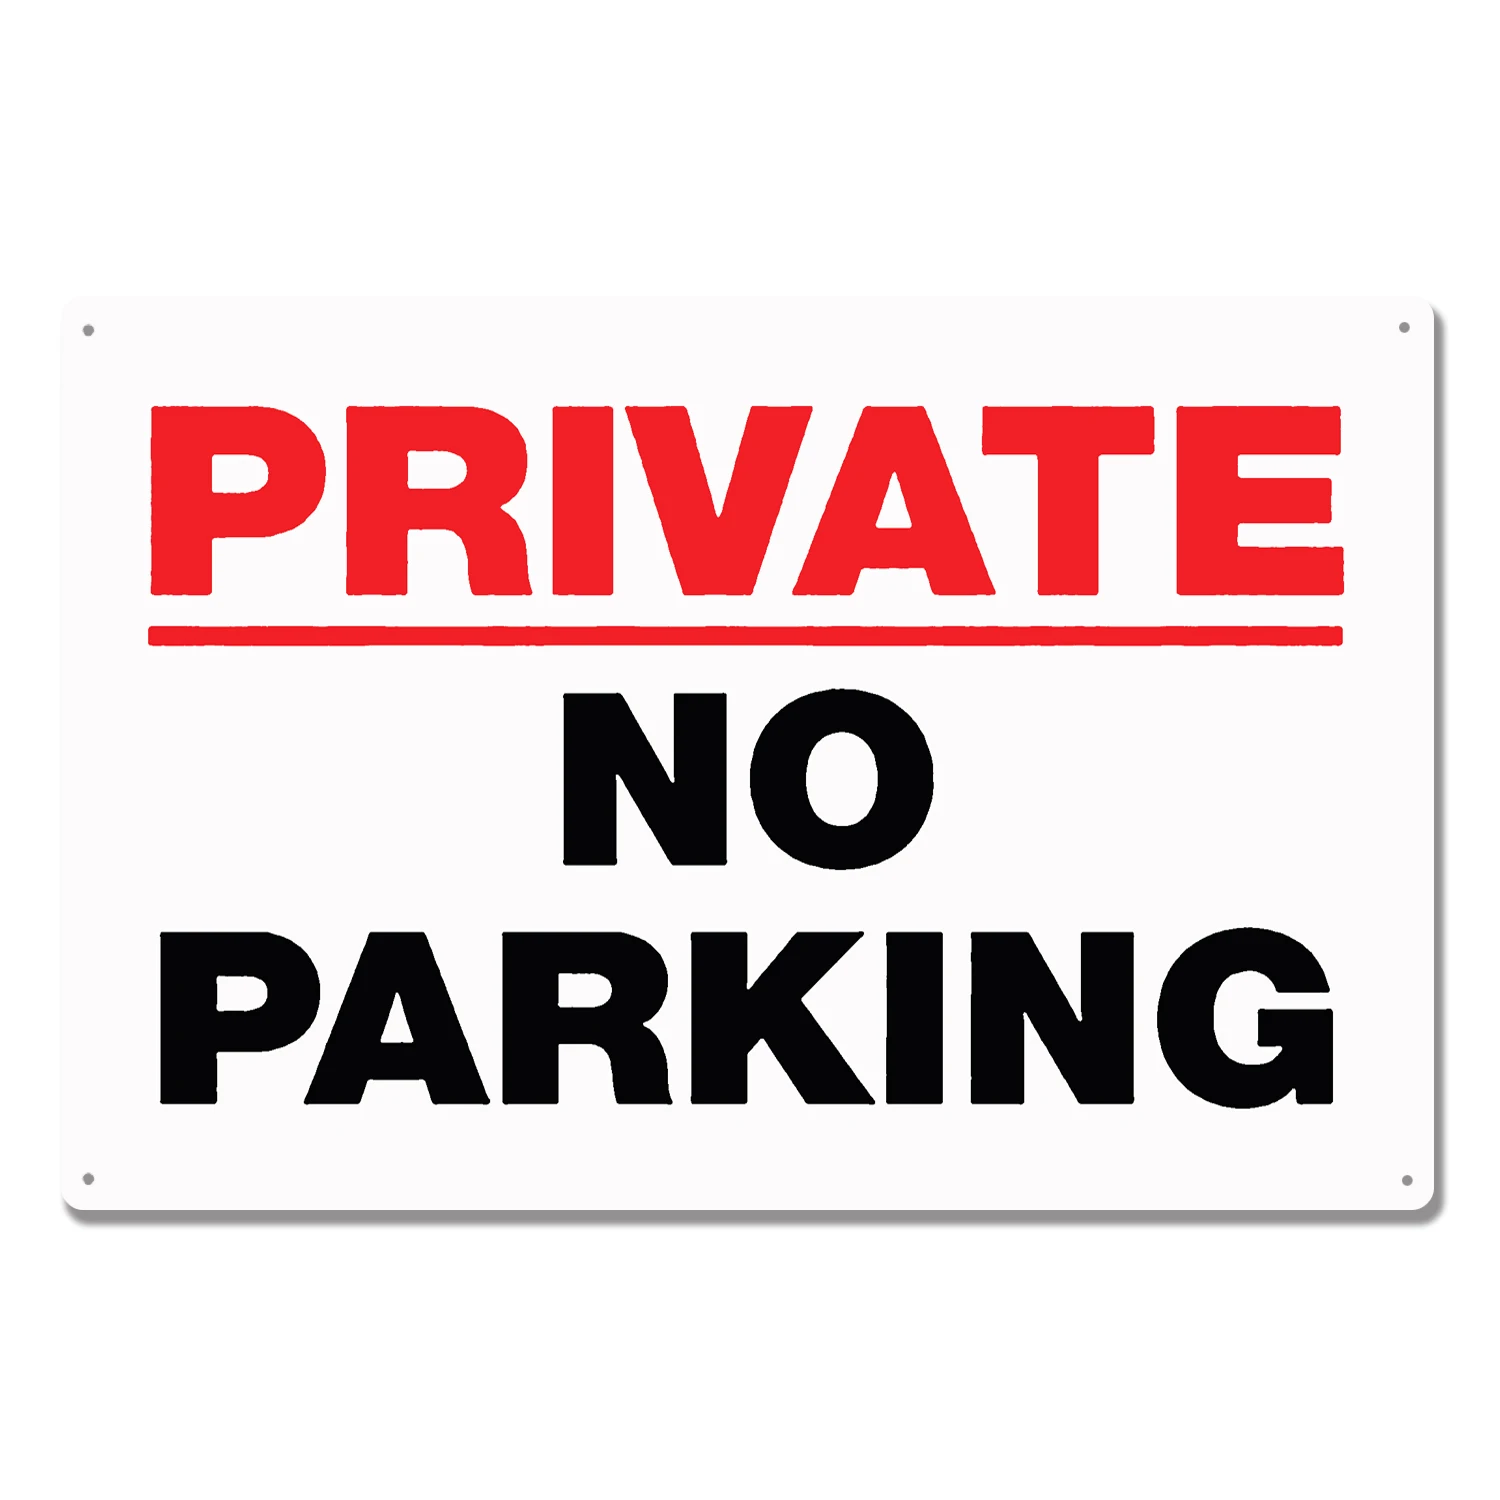 

Retro Metal Aluminum Sign Private Property No Parking Outdoor Garage Street Home Bar Club Retaurant Wall Decor Signs 12X8 Inches